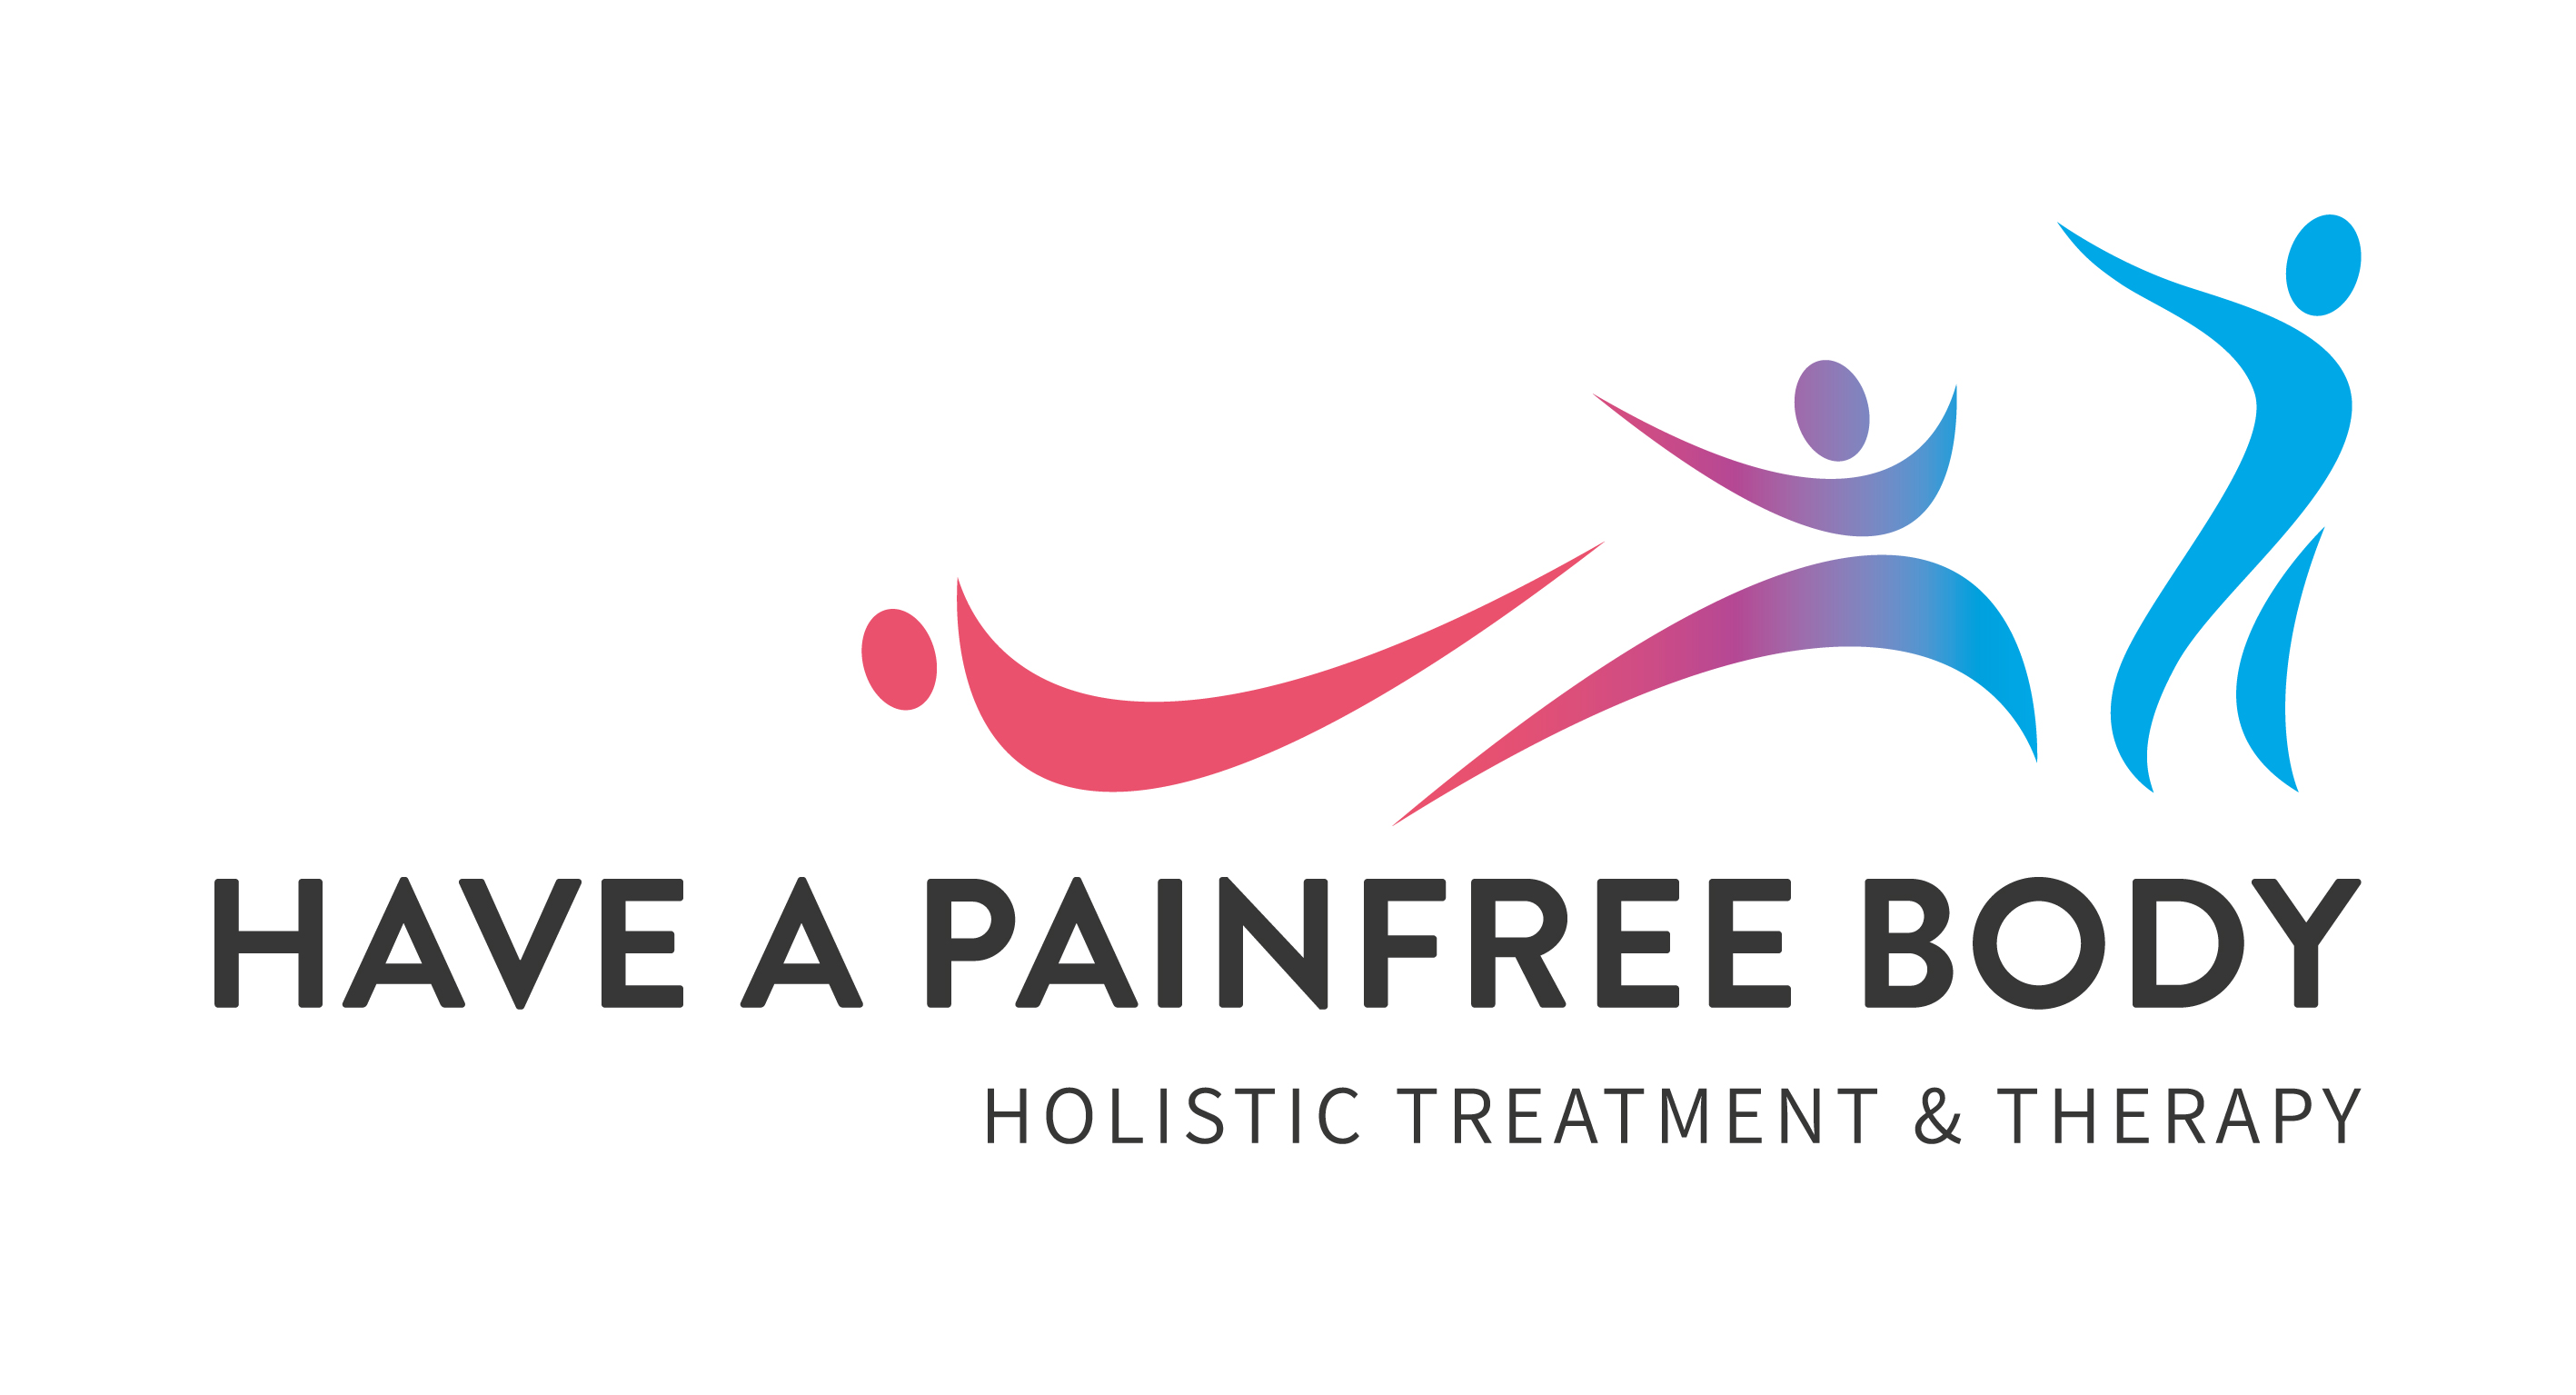 HAVE A PAINFREE BODY logo